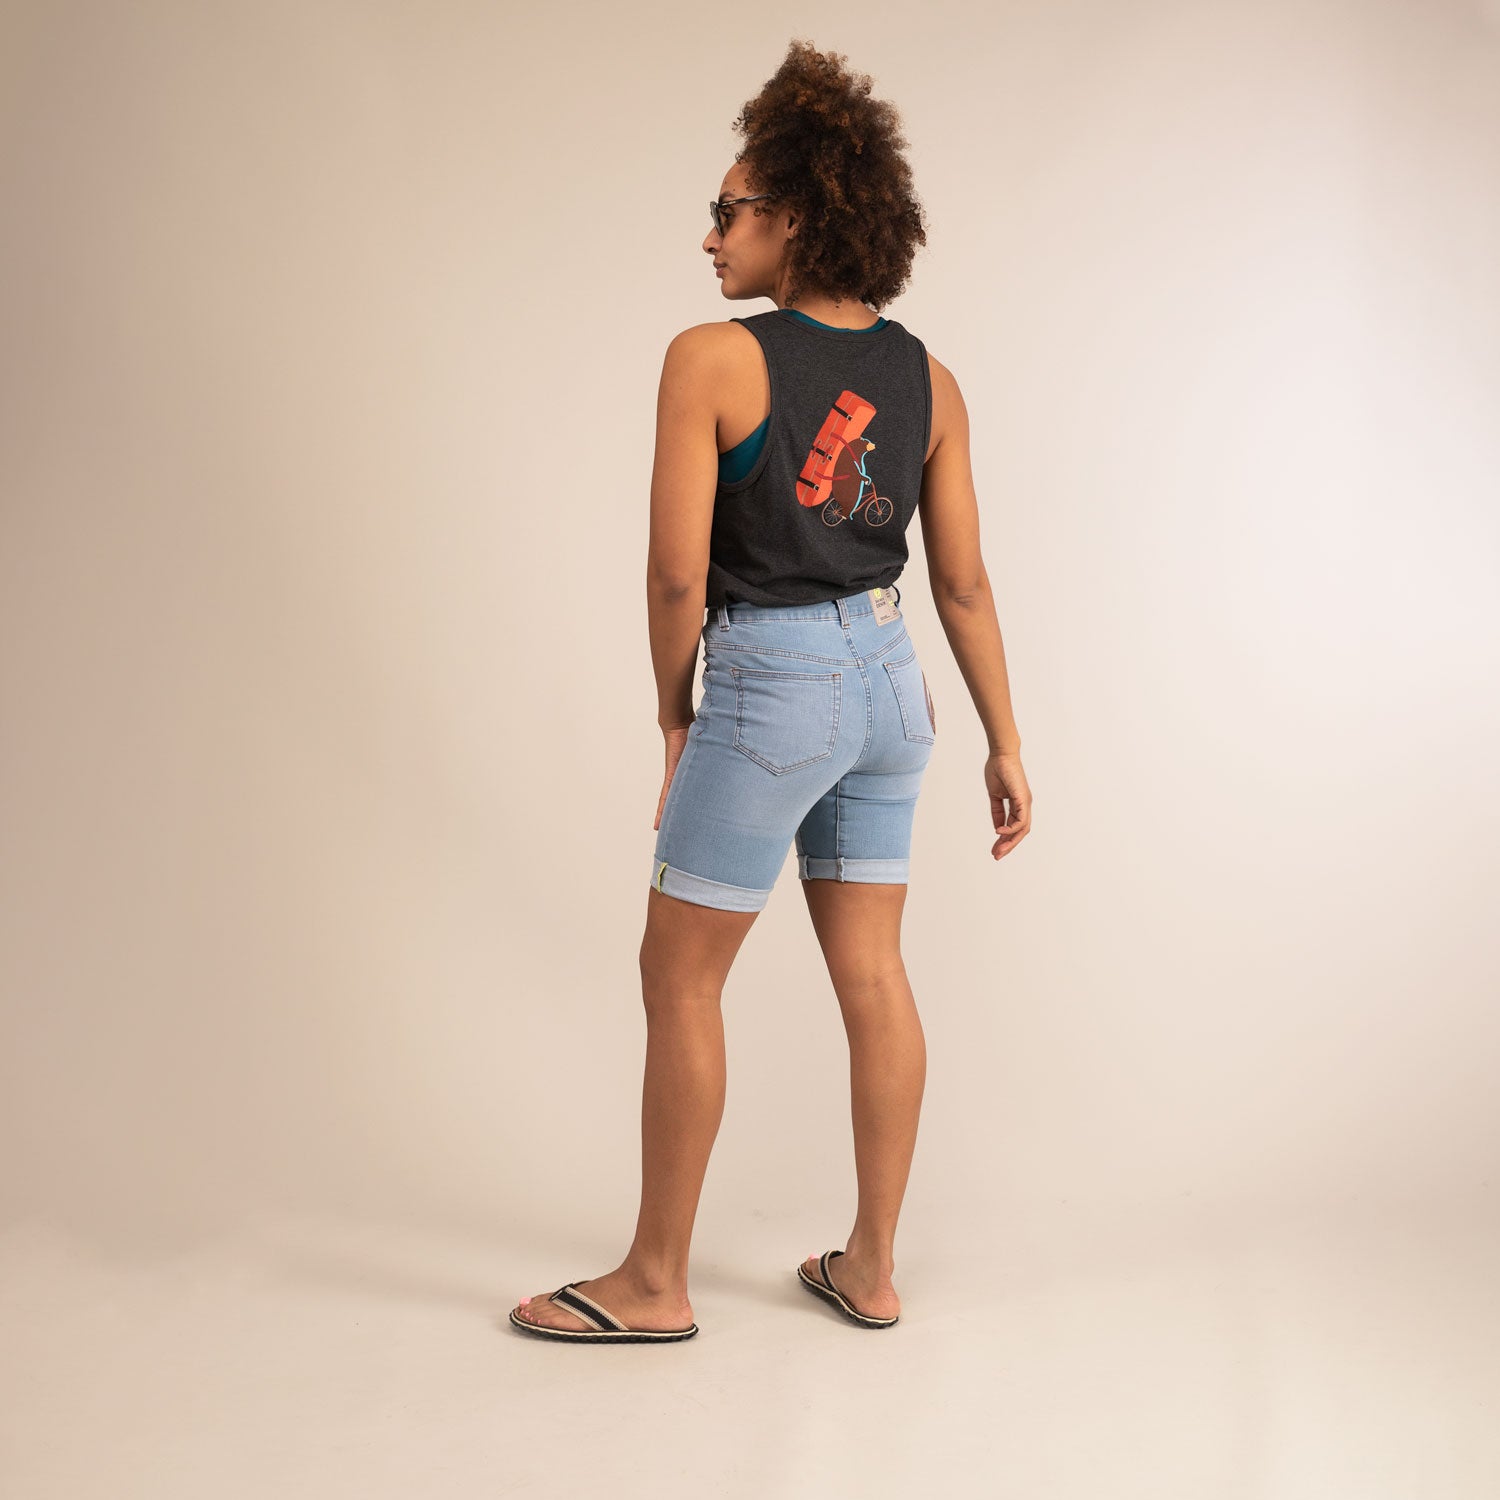 BLOQUEUR VEST | Organic Cotton Action Vest | 3RD ROCK Clothing -  Kendal is 5ft 8 with a 36" bust and wears a size M F